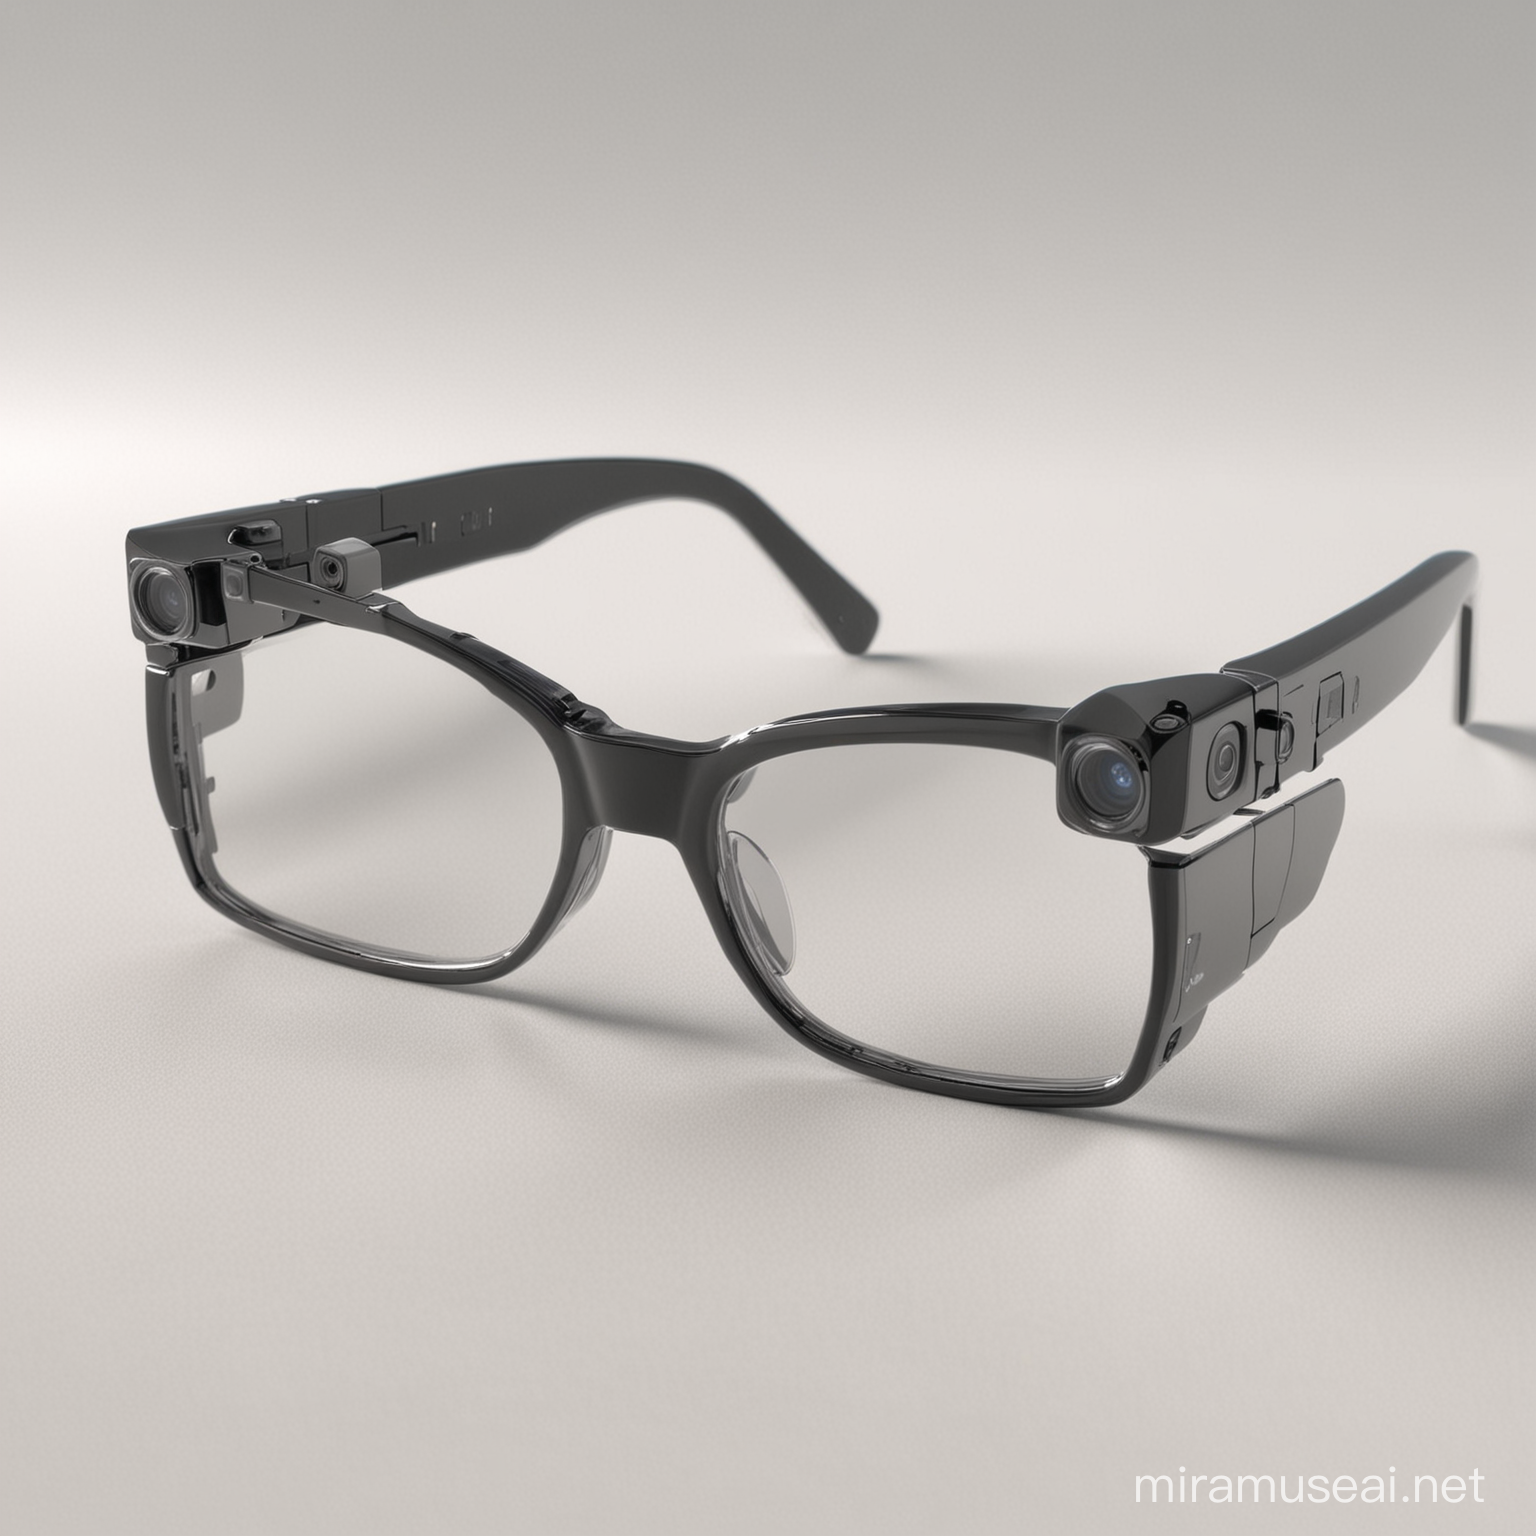 AI powered super glasses with a small webcam-like camera on the side. the glasses are placed on a white canvas, realistic. 8k. best resoultion